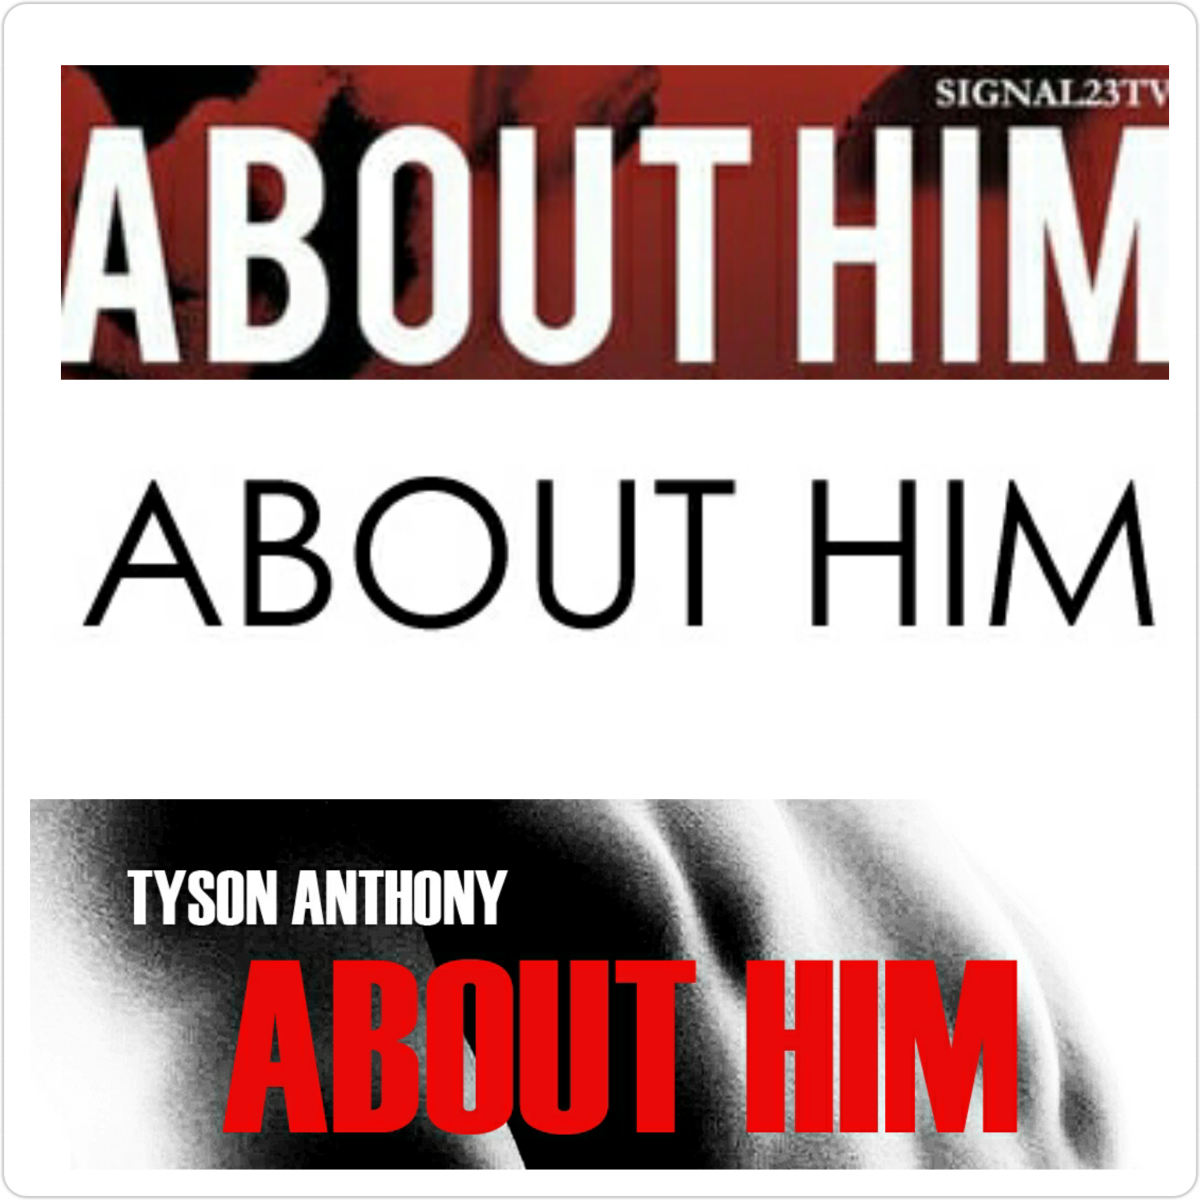 [VIDEO] What’s Up w/ “About Him” Season 2? The Showrunners Release Separate Official Statements!